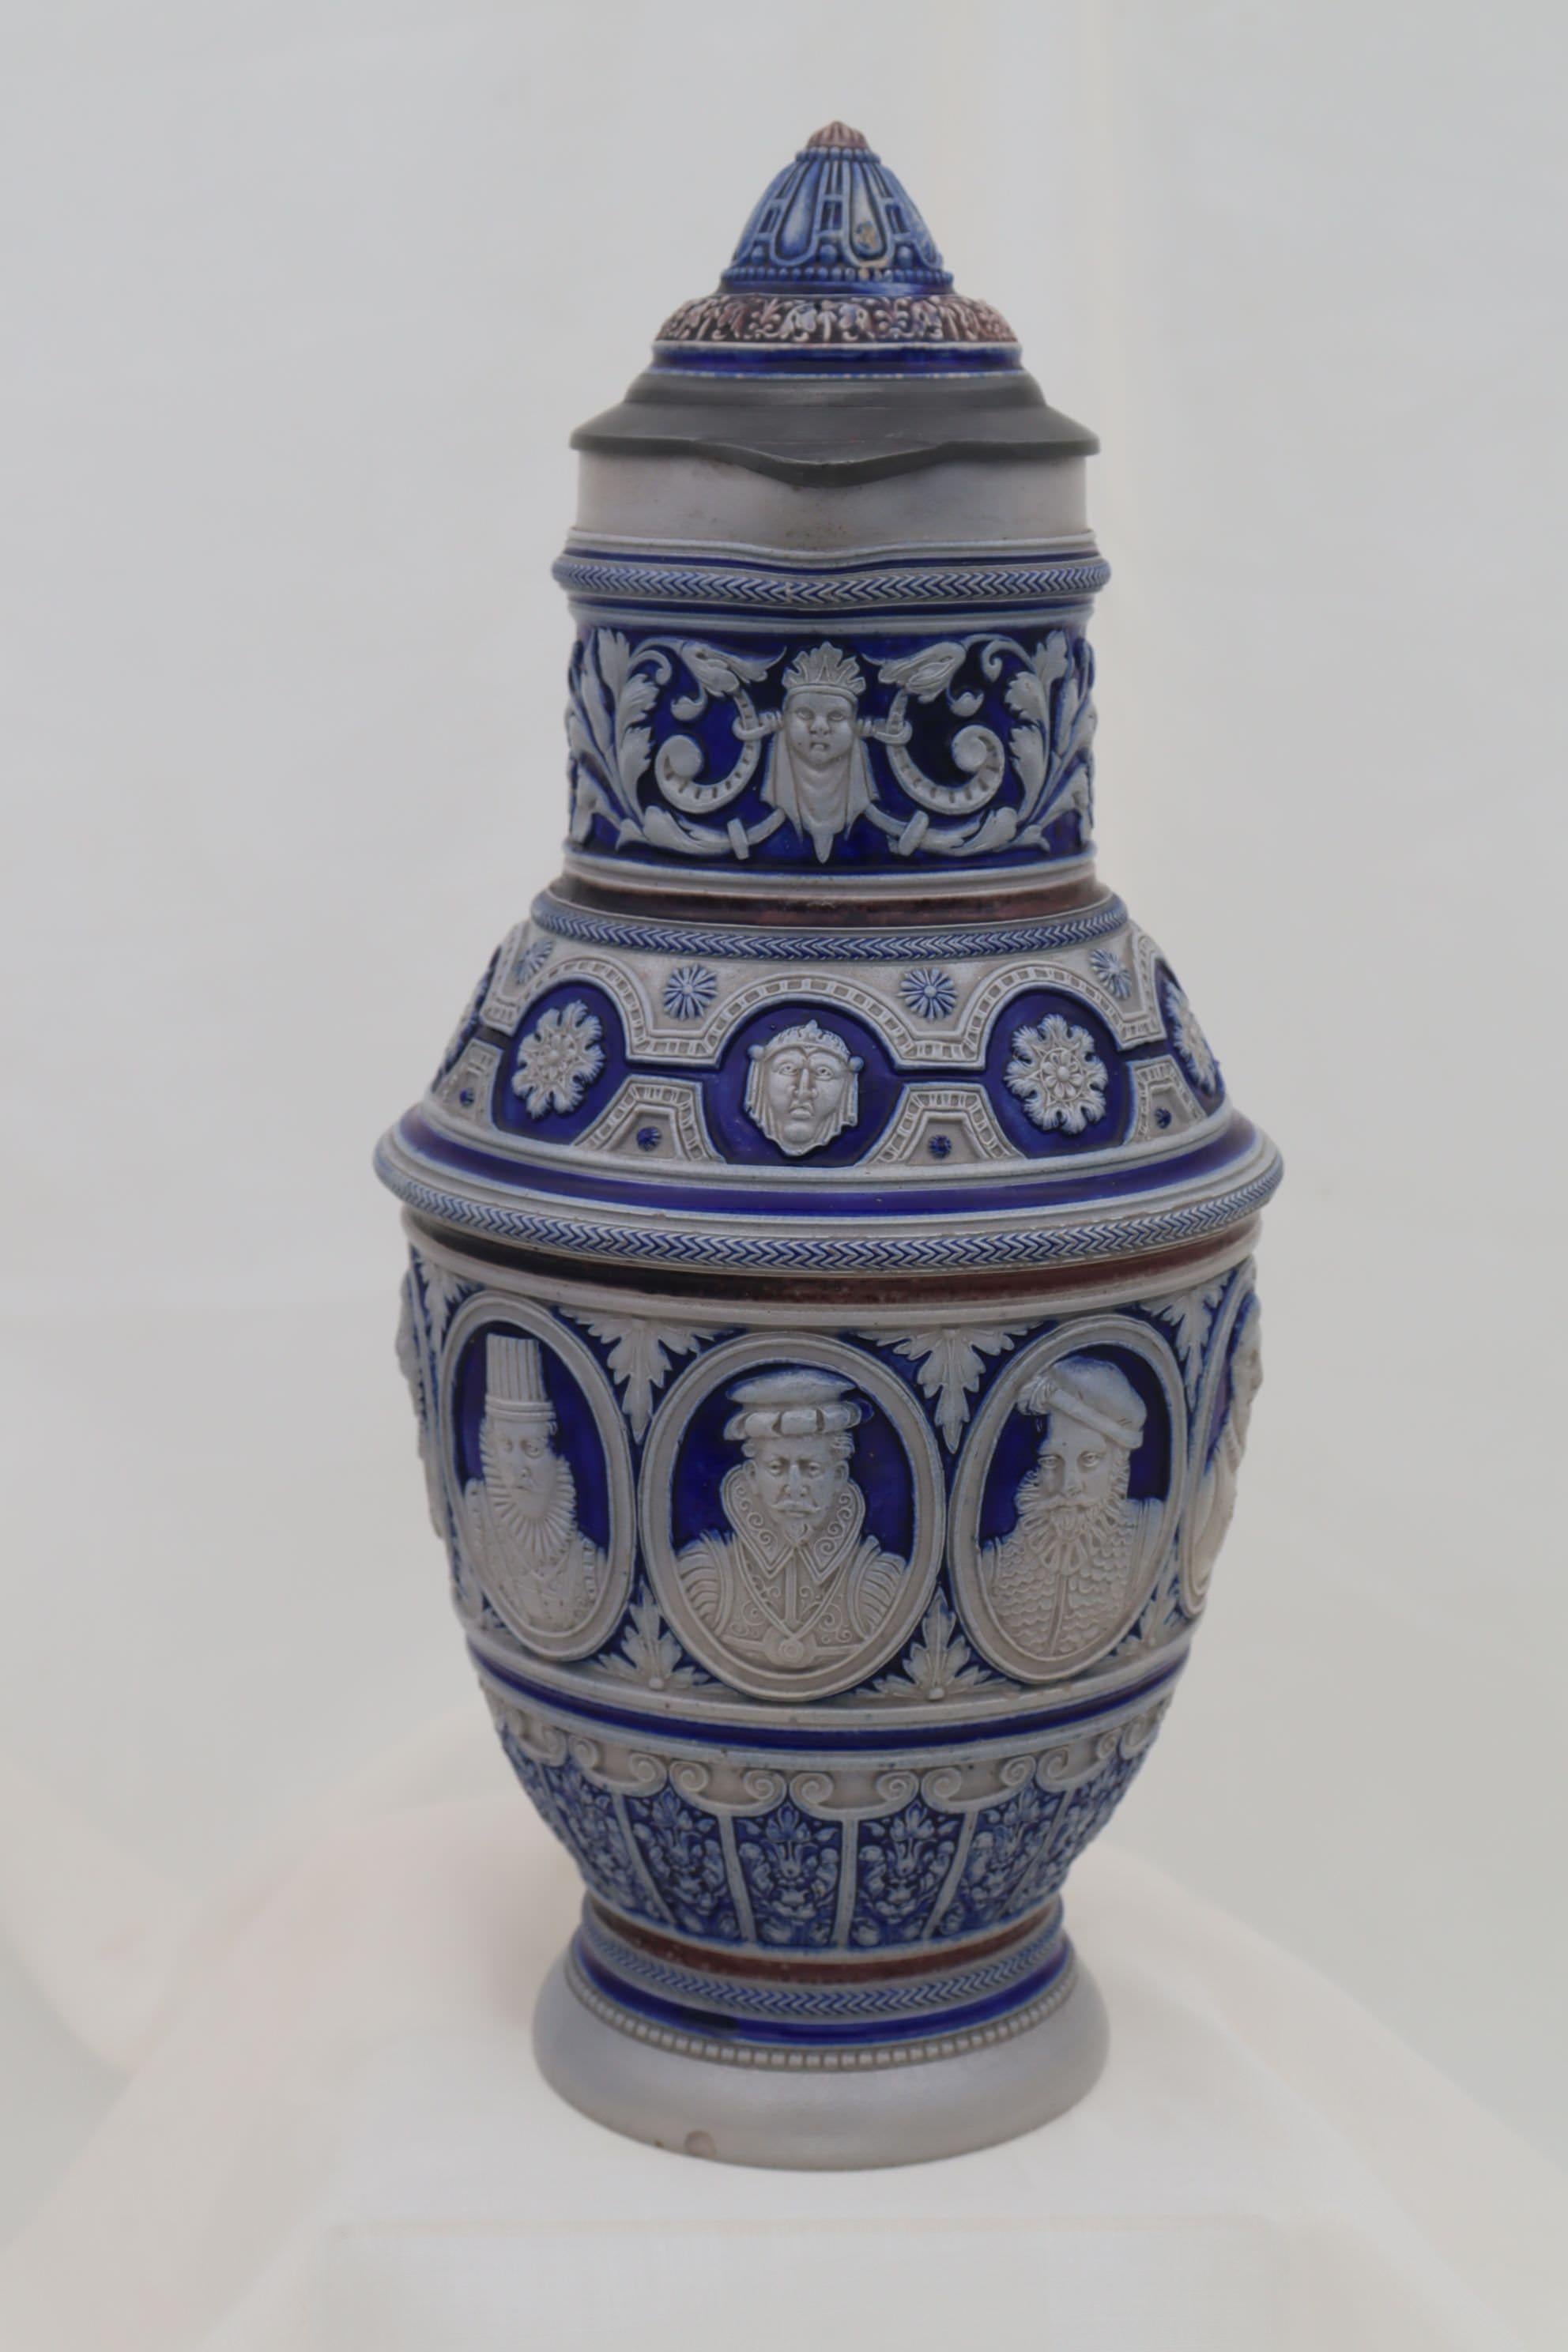 This intricately detailed Westerwald stoneware beer jug is encircled with a central band of portraits of figures in medieval dress, with more decoration above and below. The backgrounds to these decorations are a rich cobalt blue, and the blue with